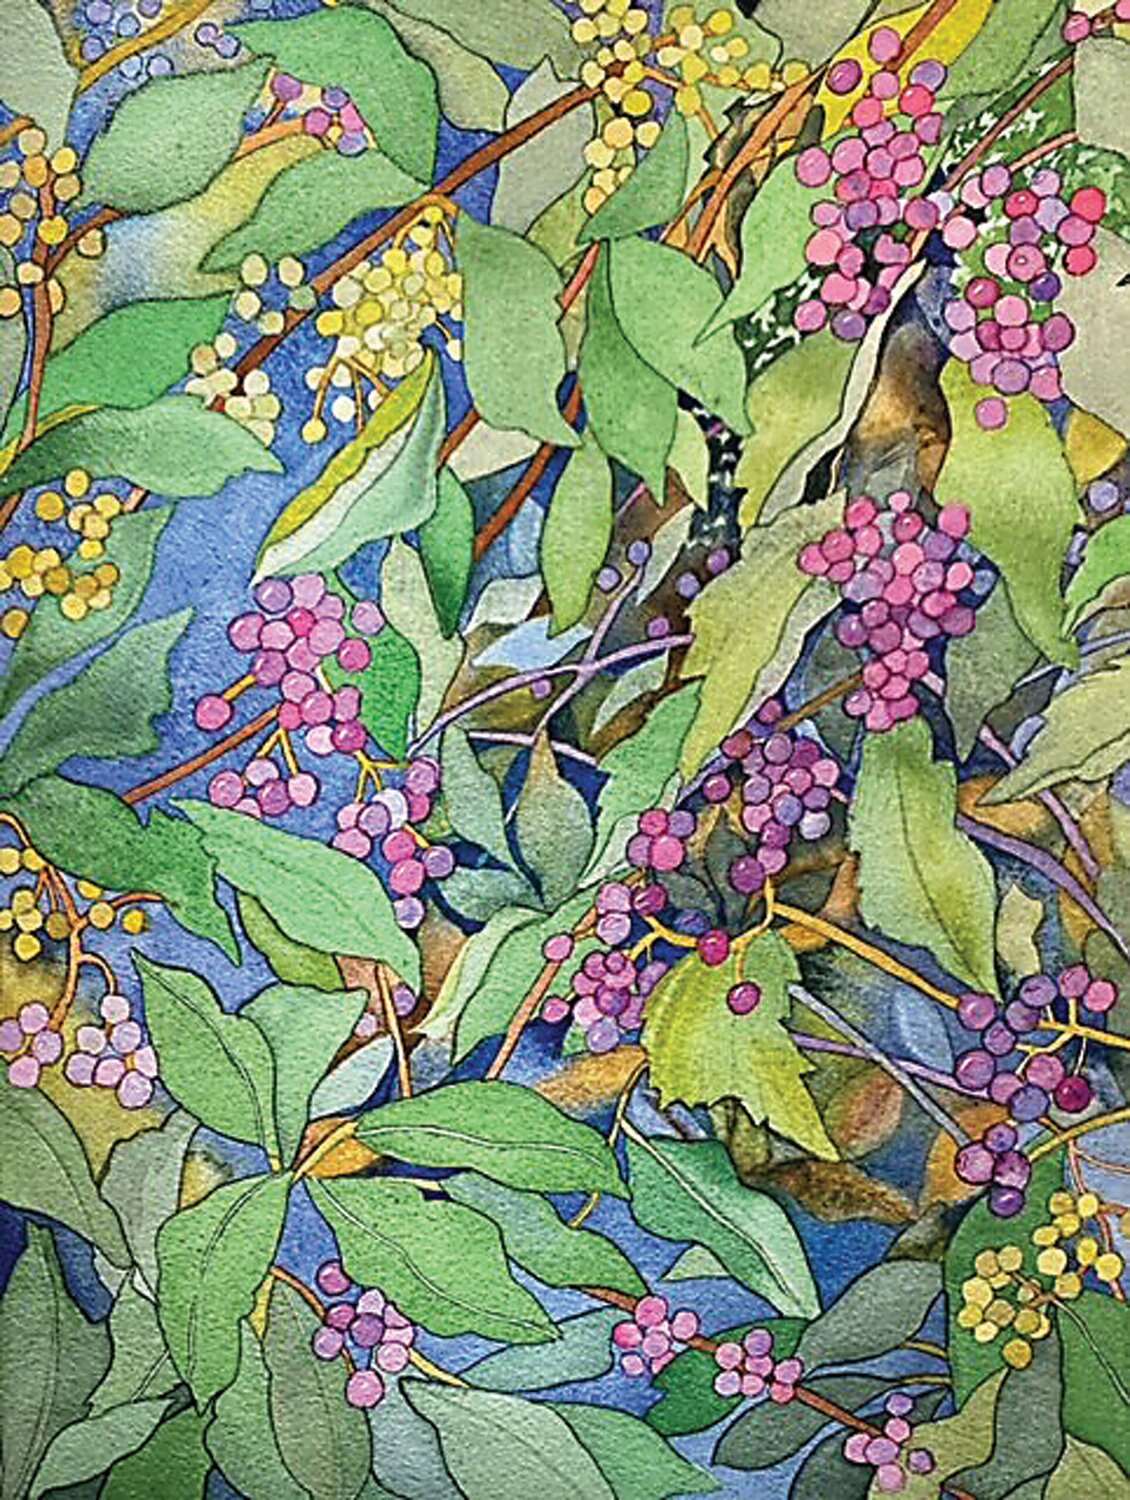 “Beauty Berry” is a watercolor by Sharon Pitts.